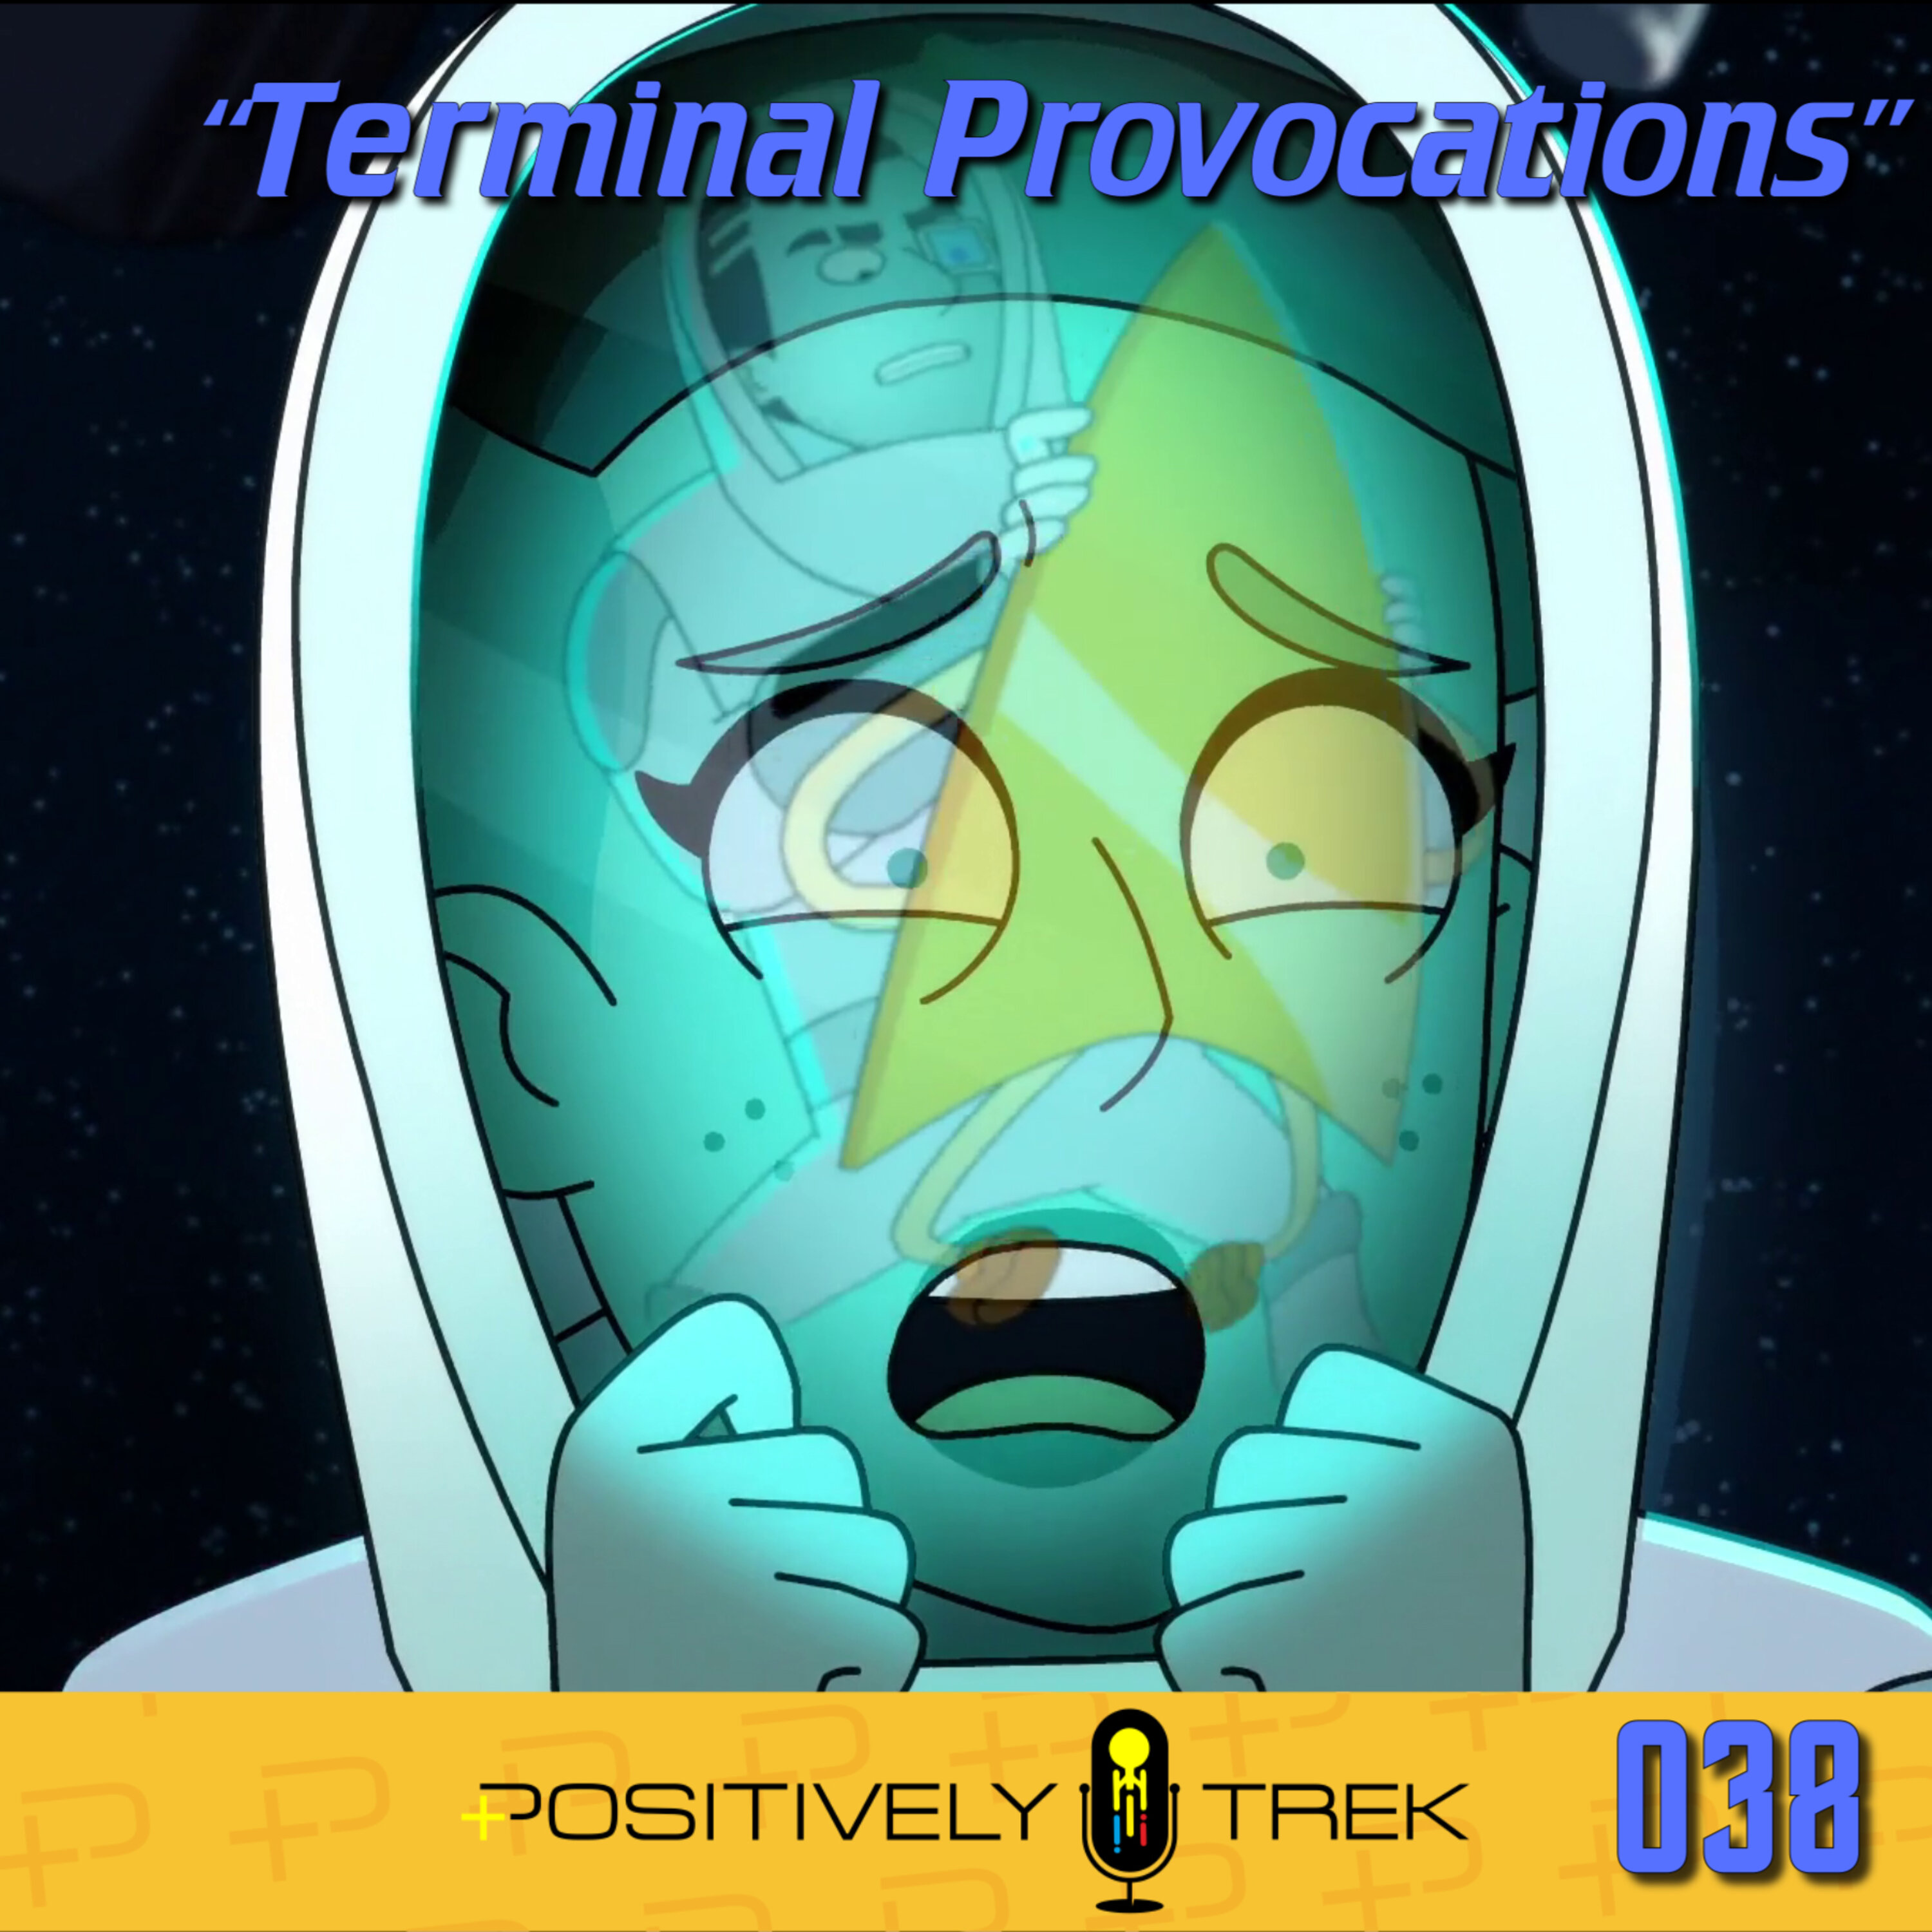 Lower Decks Review: “Terminal Provocations” (1.06) Image